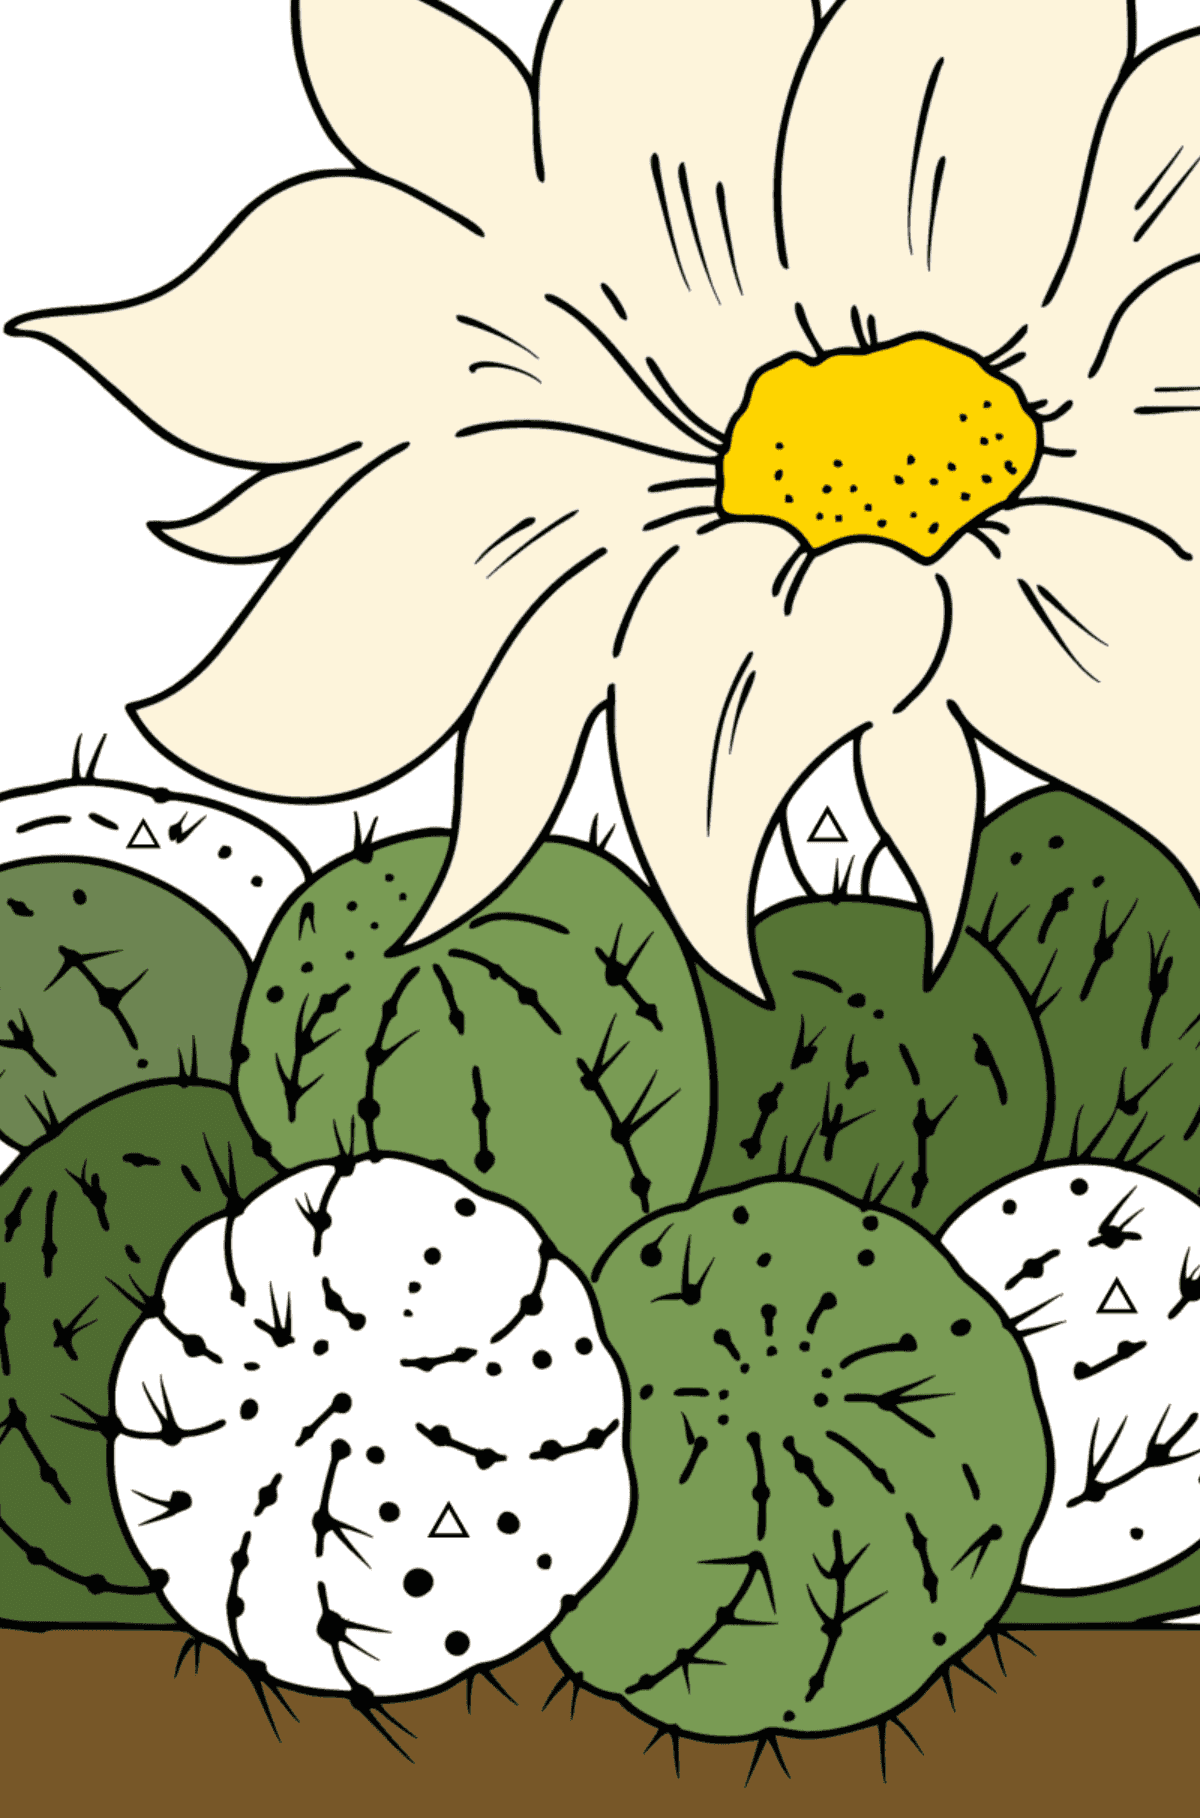 Little Nipple Cactus Coloring page - Coloring by Geometric Shapes for Kids